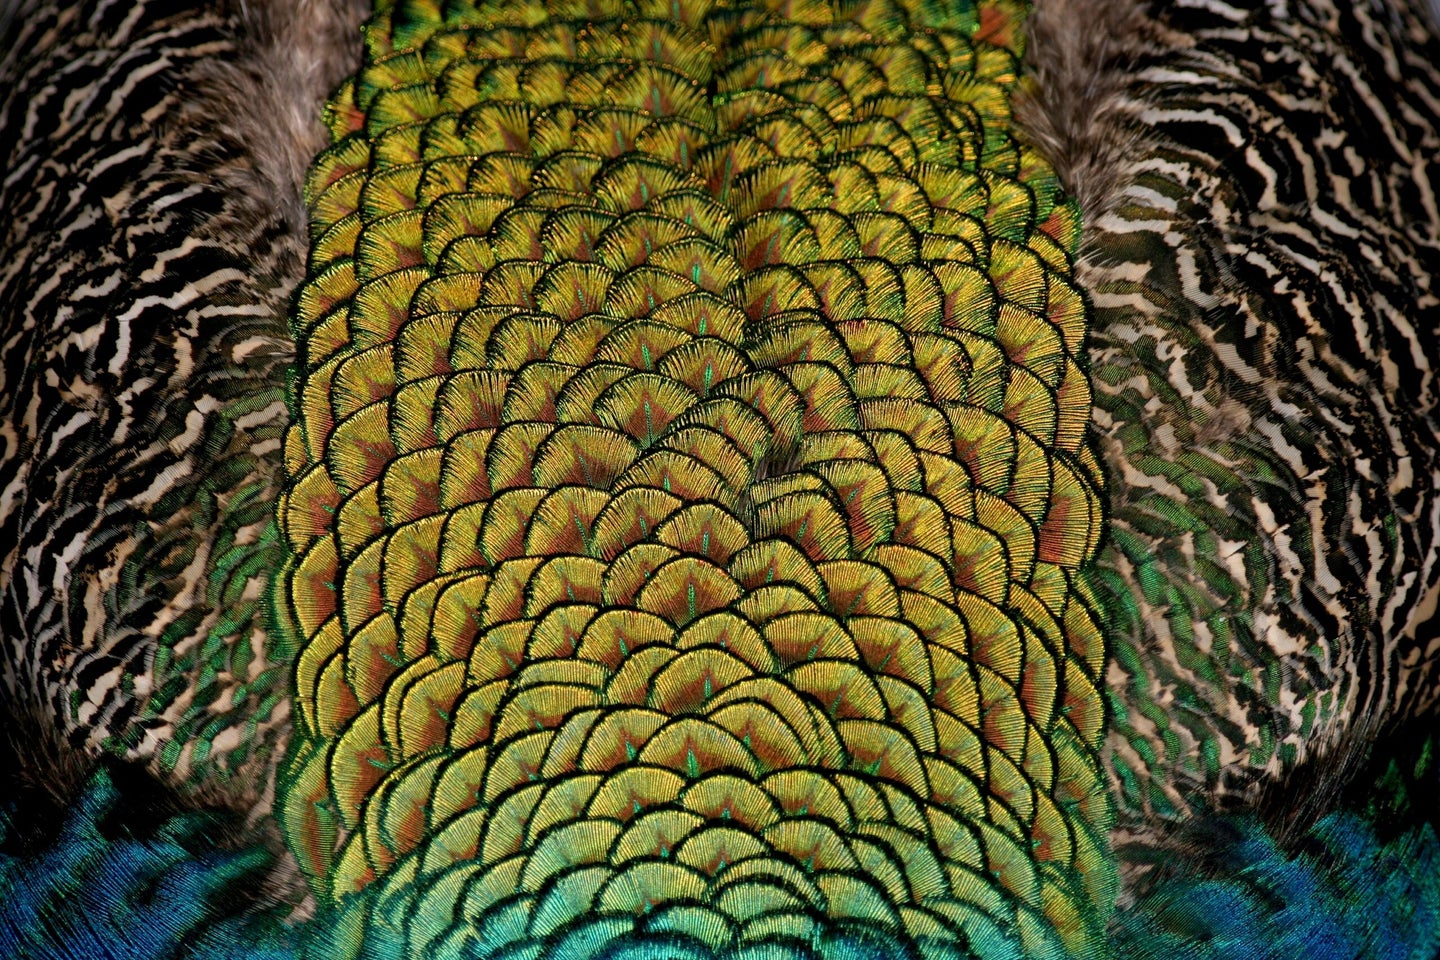 colorful bird feathers